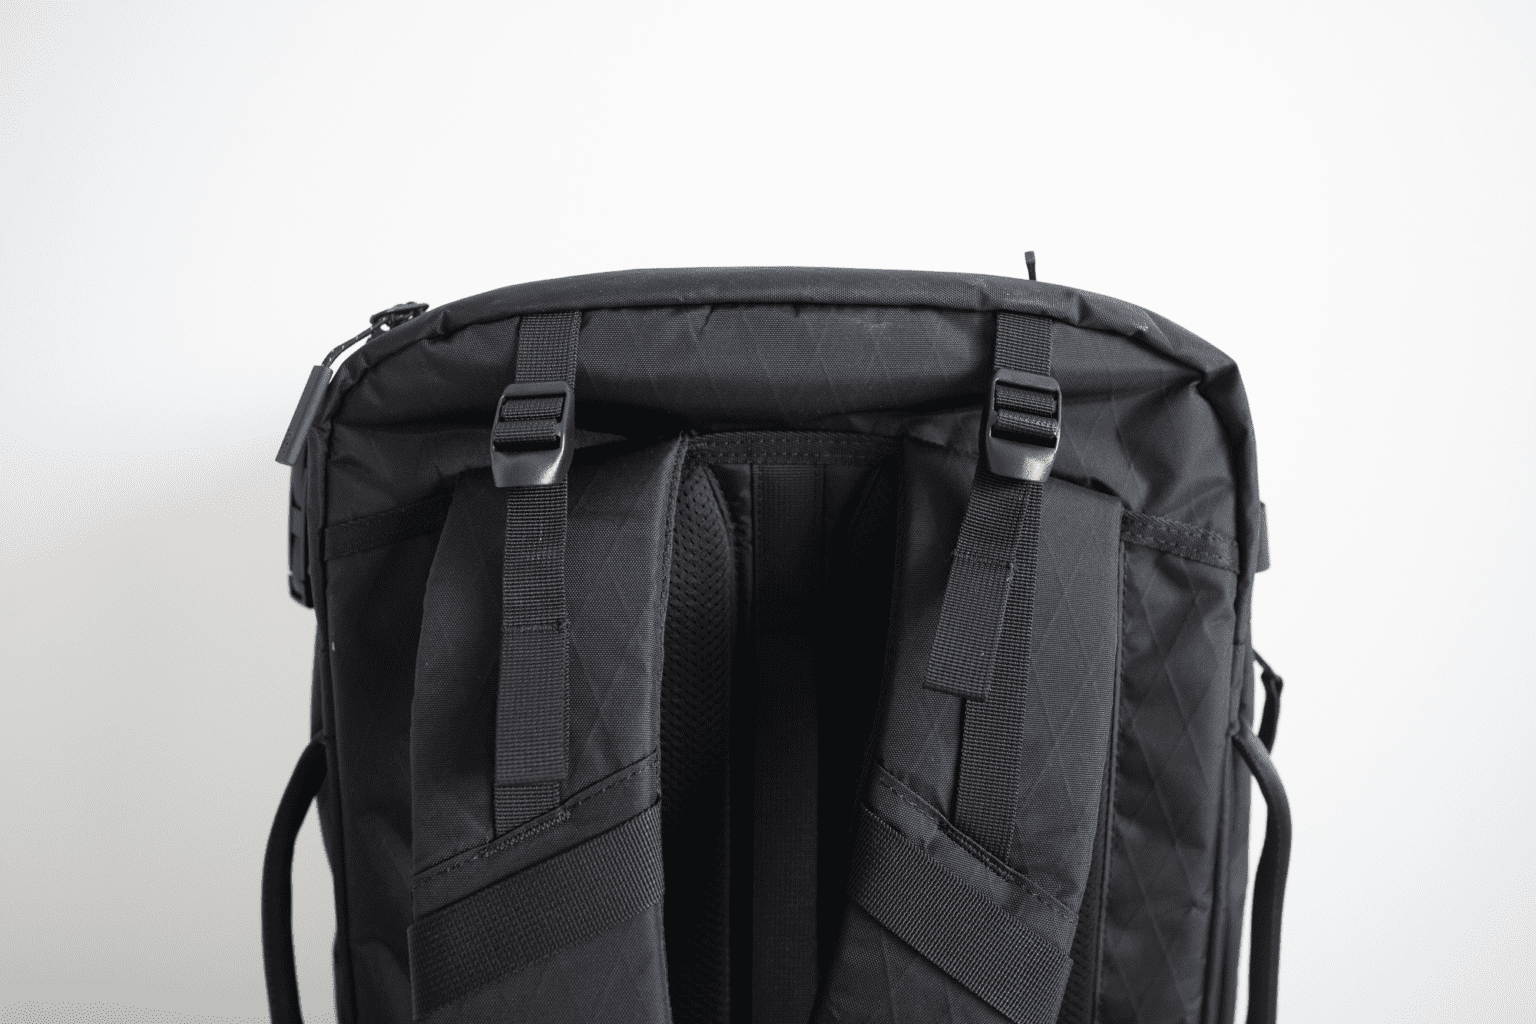 Aer Travel Pack 3 Review - Alex Kwa